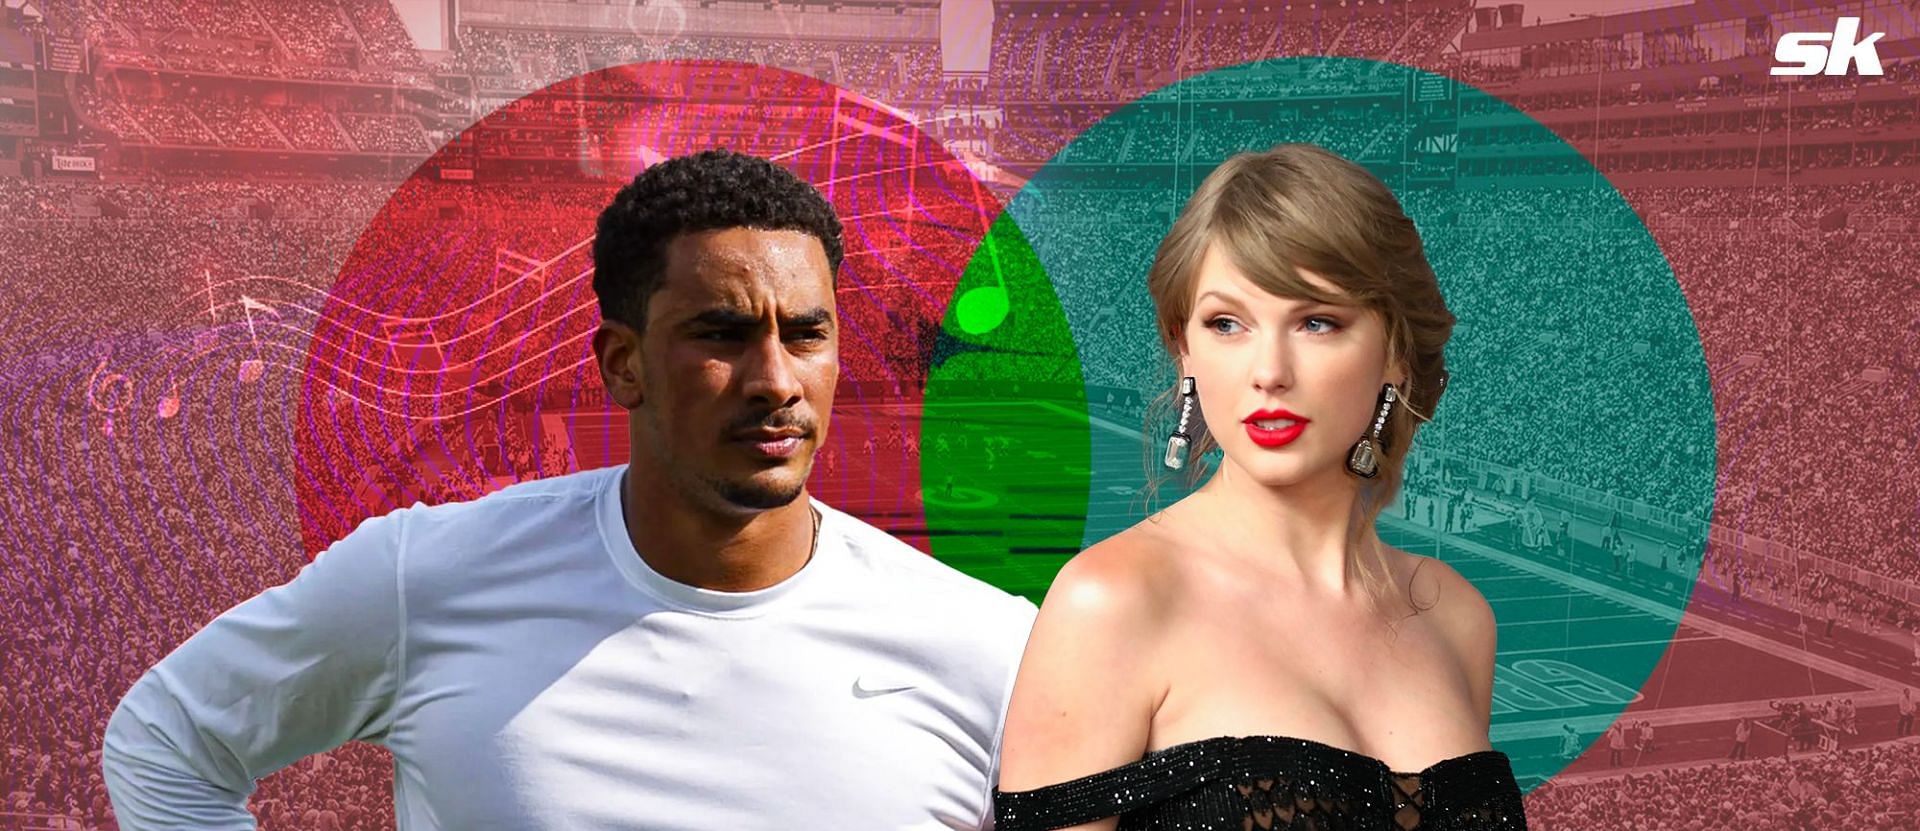 Jordan Love tried to smooth things over with Taylor Swift